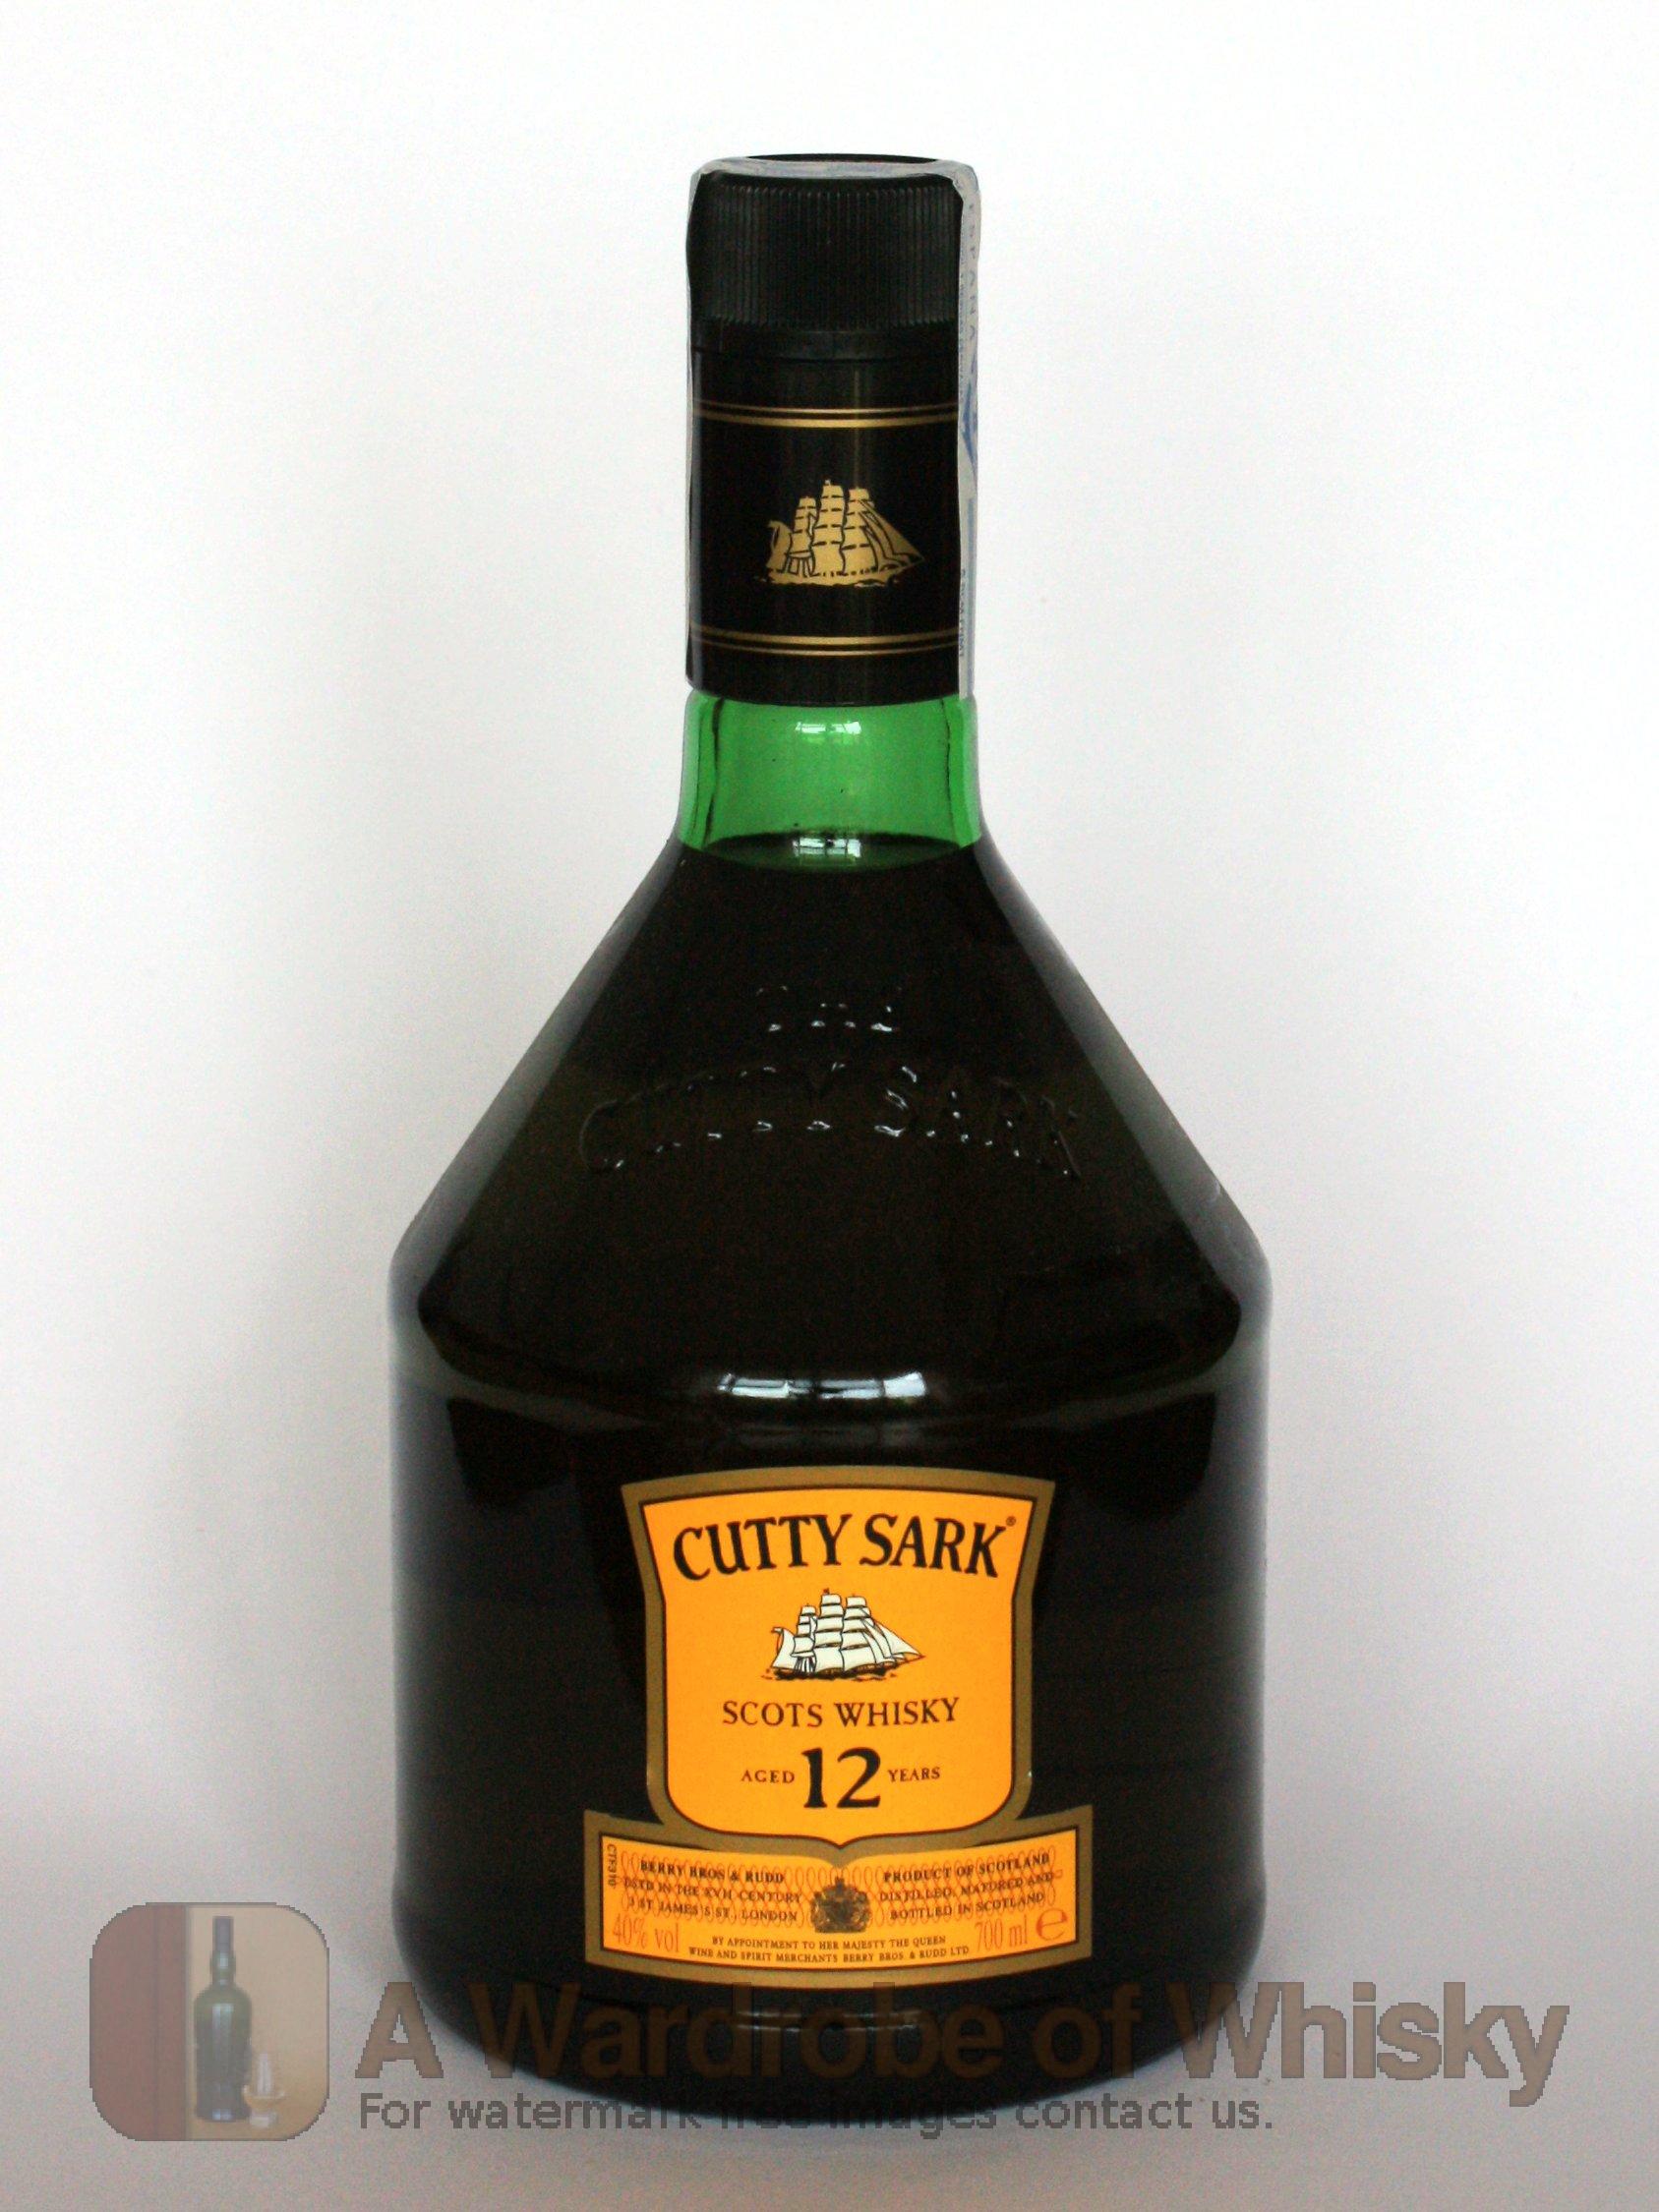 Buy Cutty Sark 12 year Emerald Blended Whisky - Cutty Sark